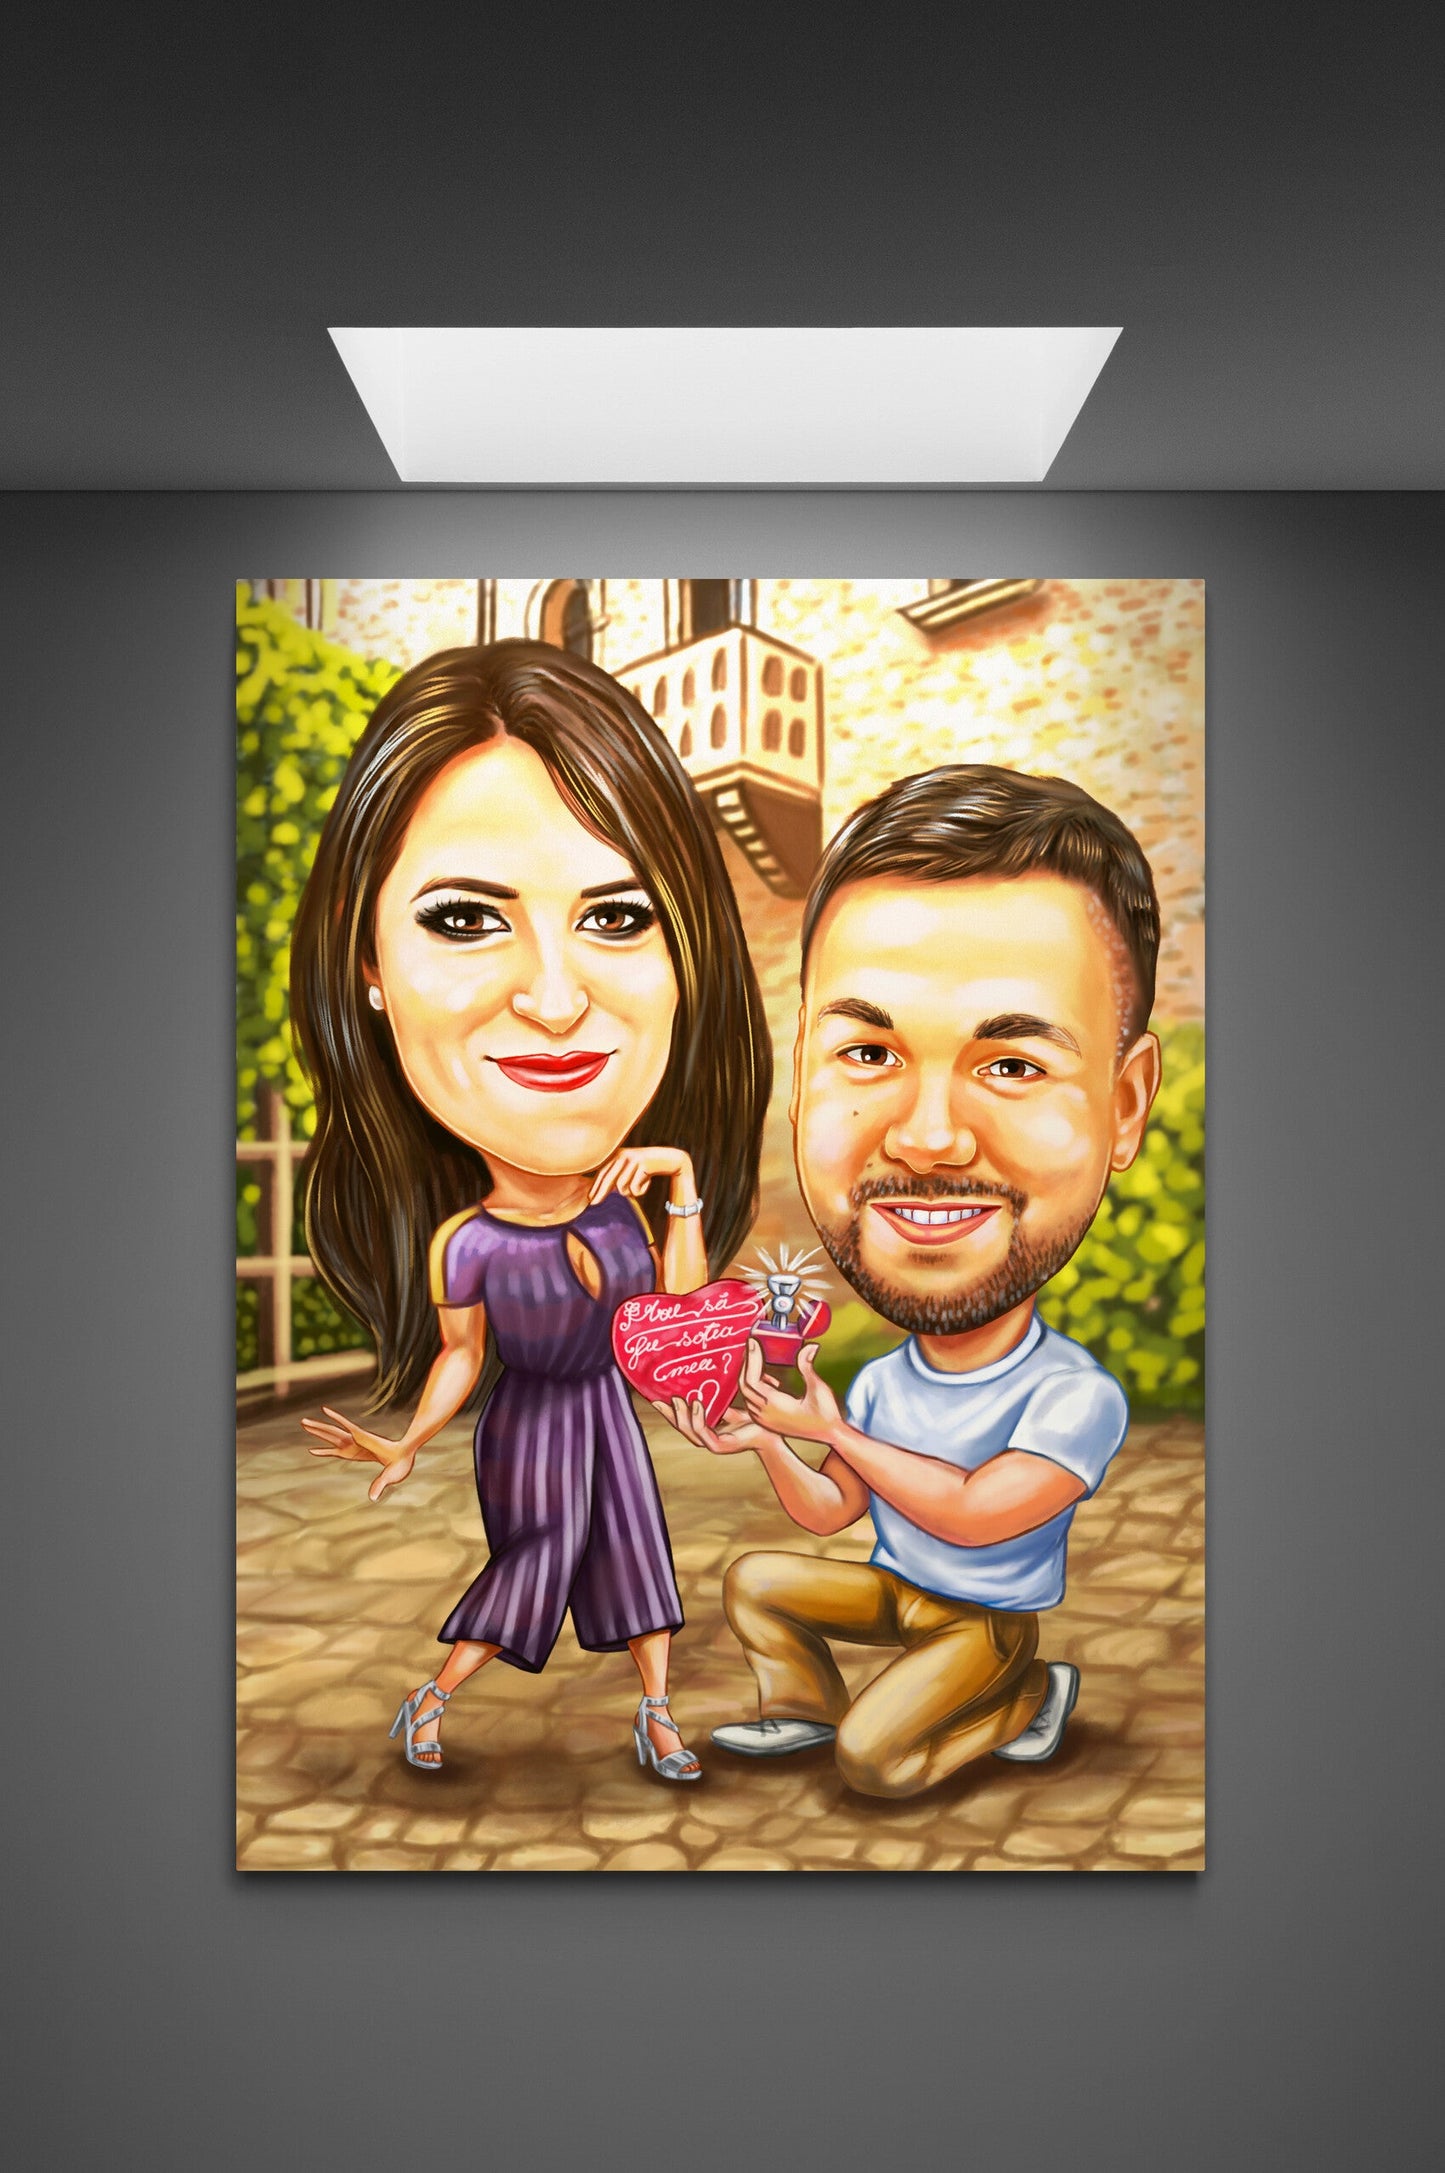 Marriage proposal caricature